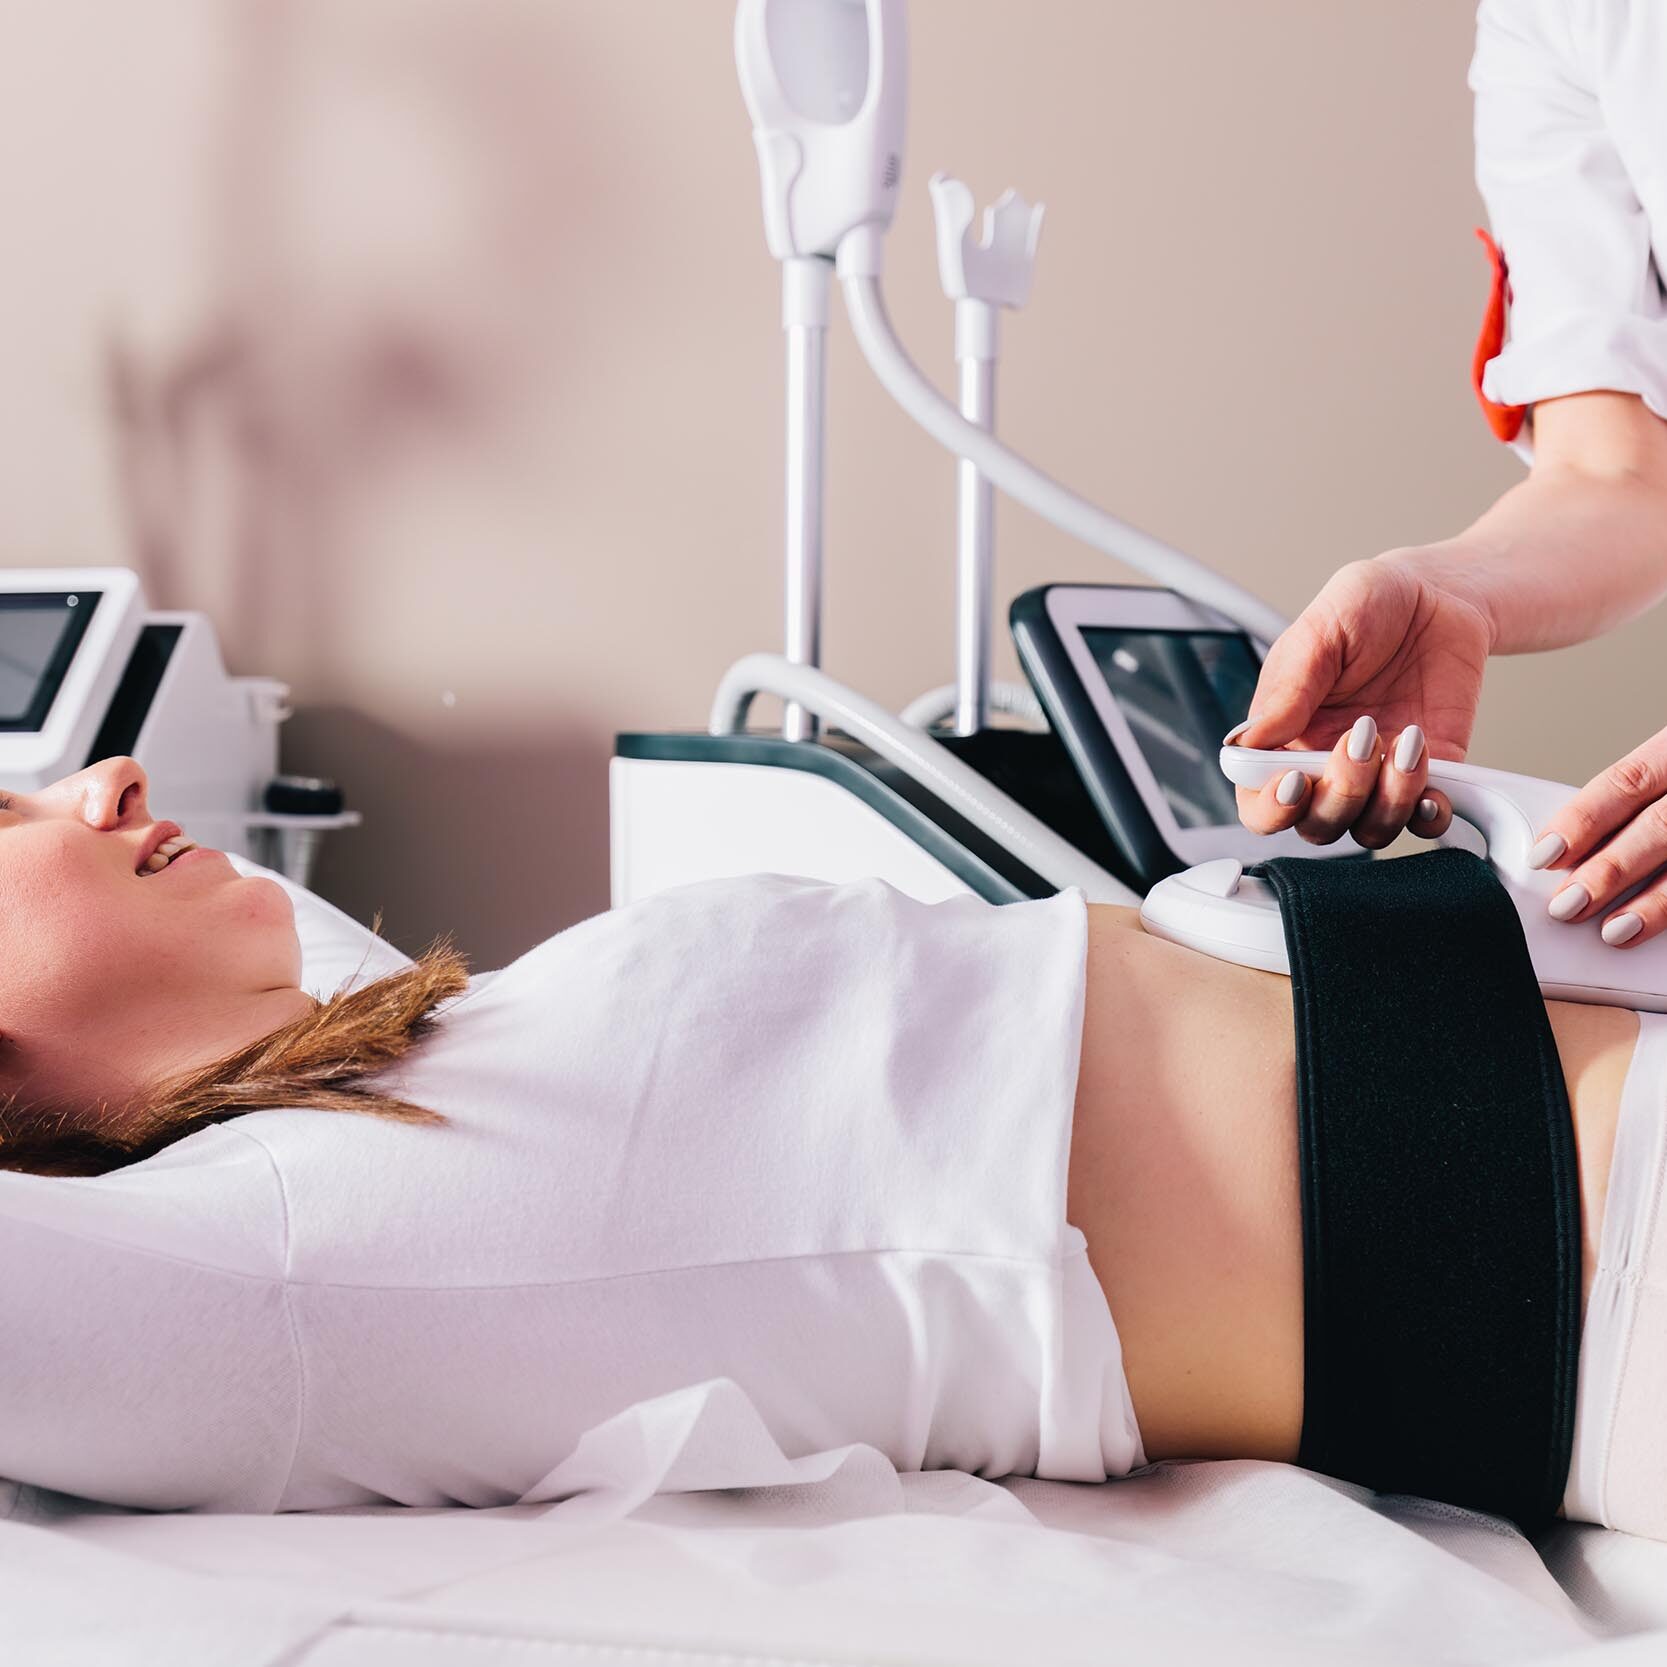 Woman getting ems treatment on abdomen to burn fat and build muscles, slimming technology